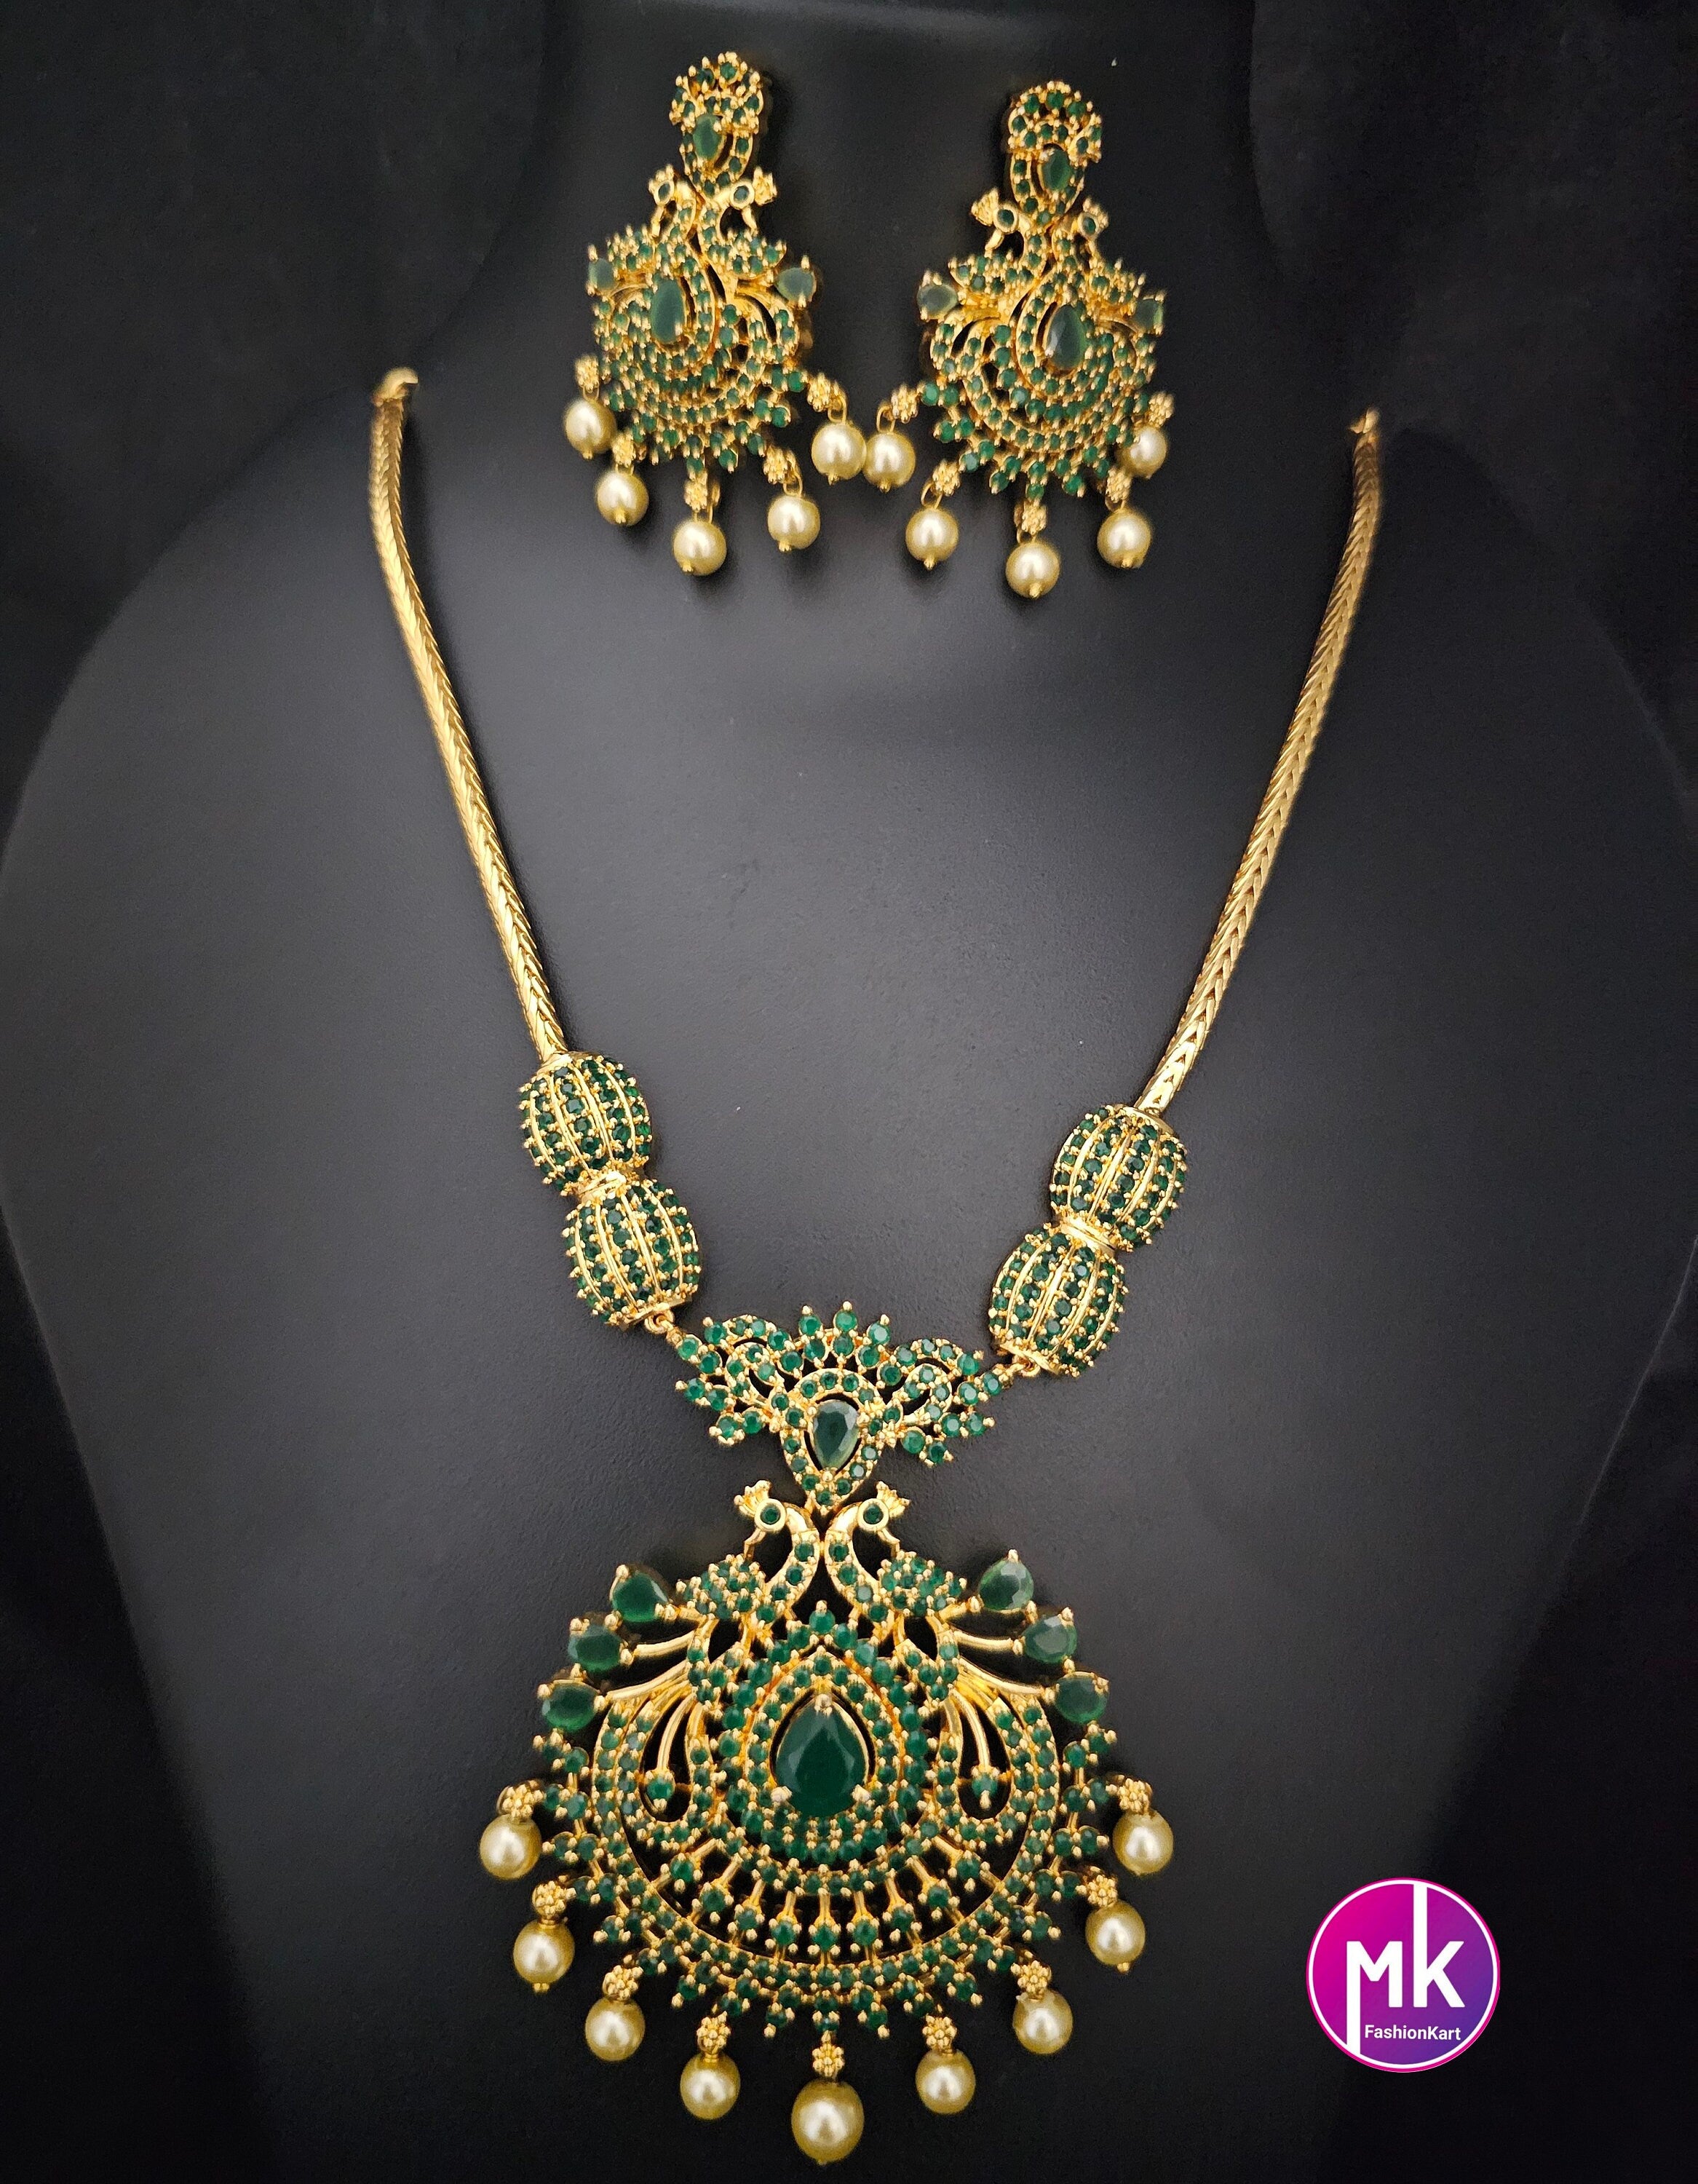 Premium Gold finish Peacock AD Emerald Stone Necklace with matching Earrings